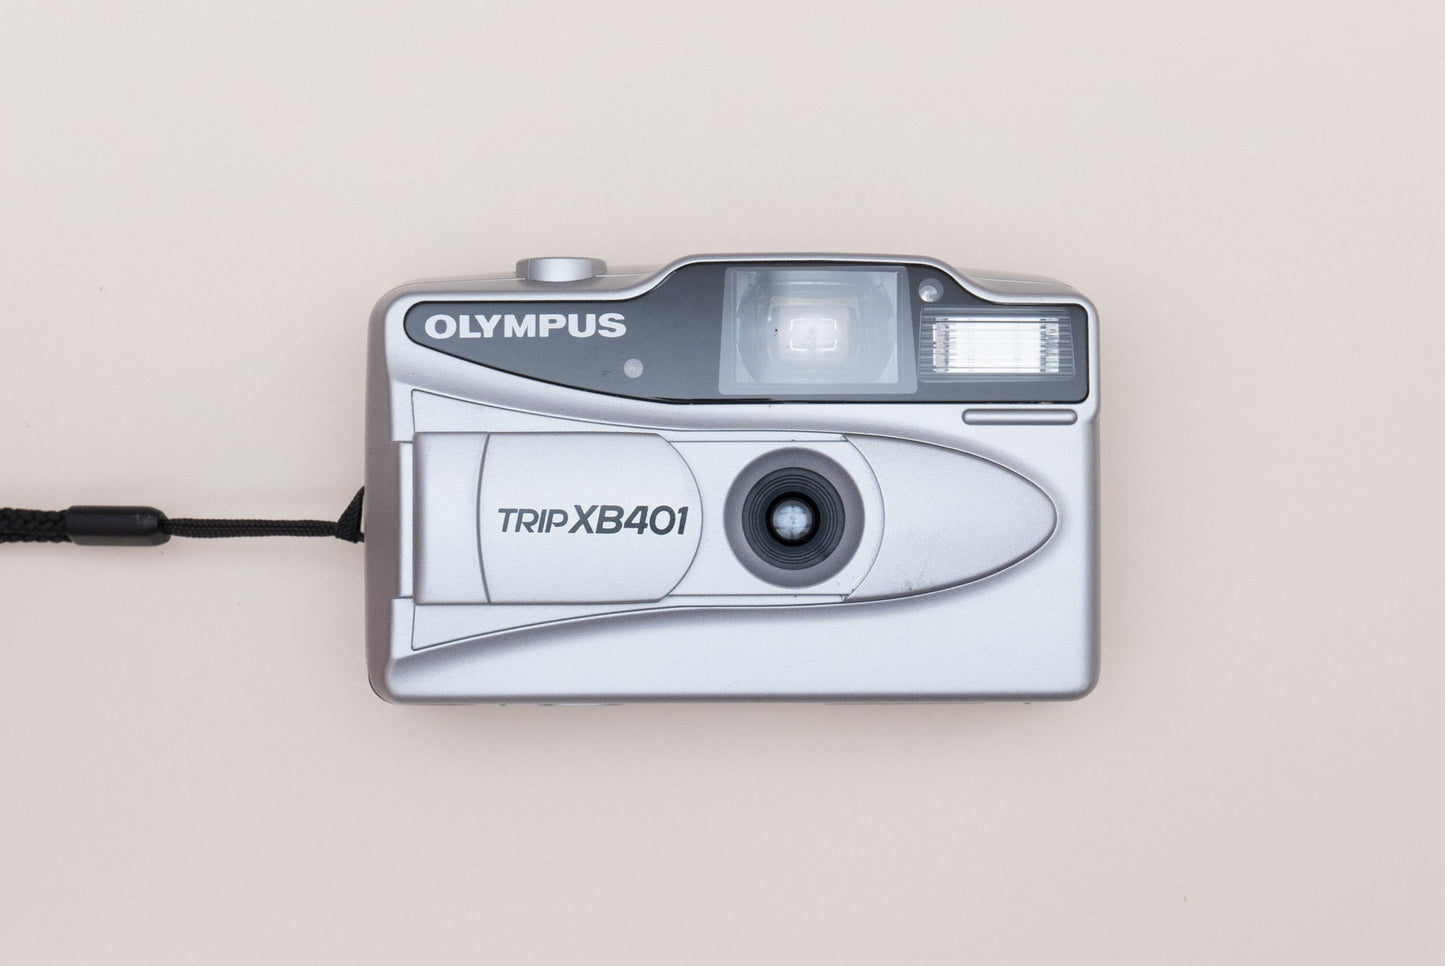 Olympus Trip XB 401 Compact 35mm Point and Shoot Film Camera